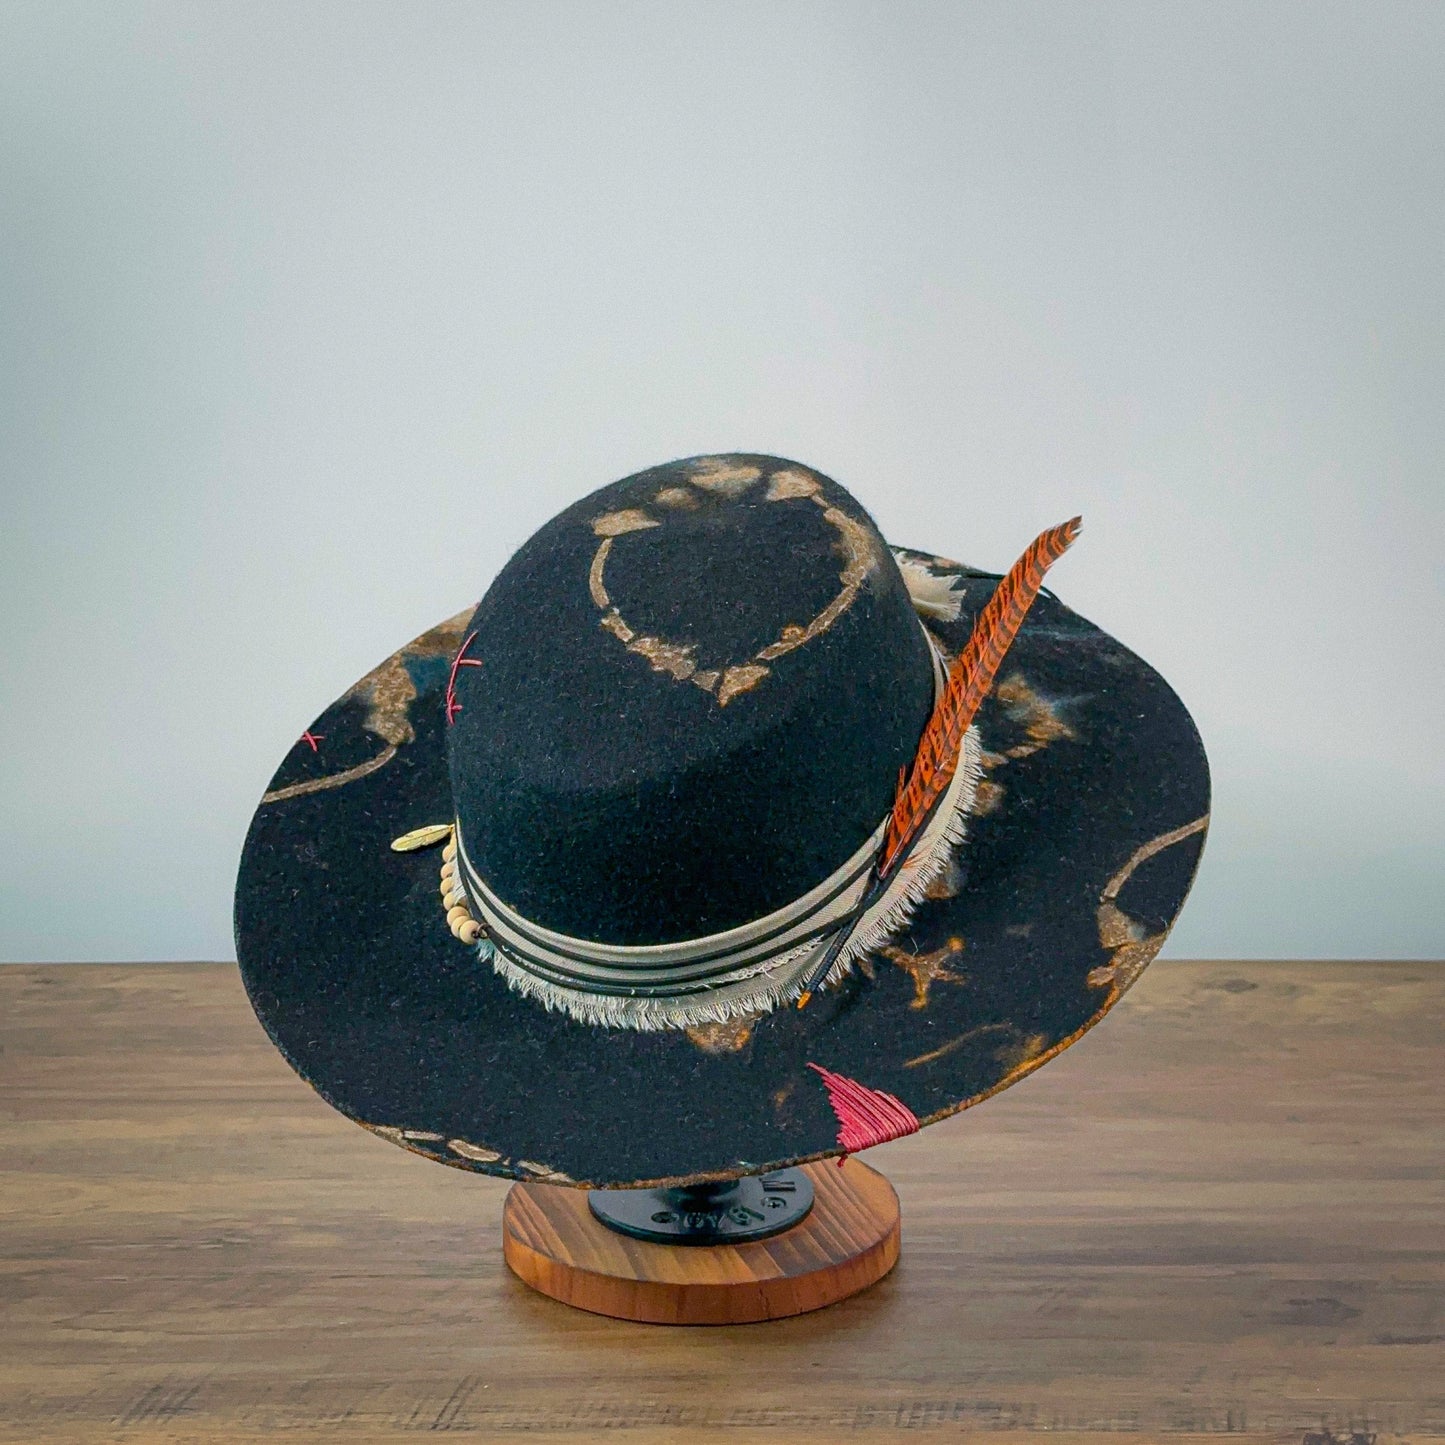 Aukala M Handcrafted Felt Hat with Unique Spinning Techniques